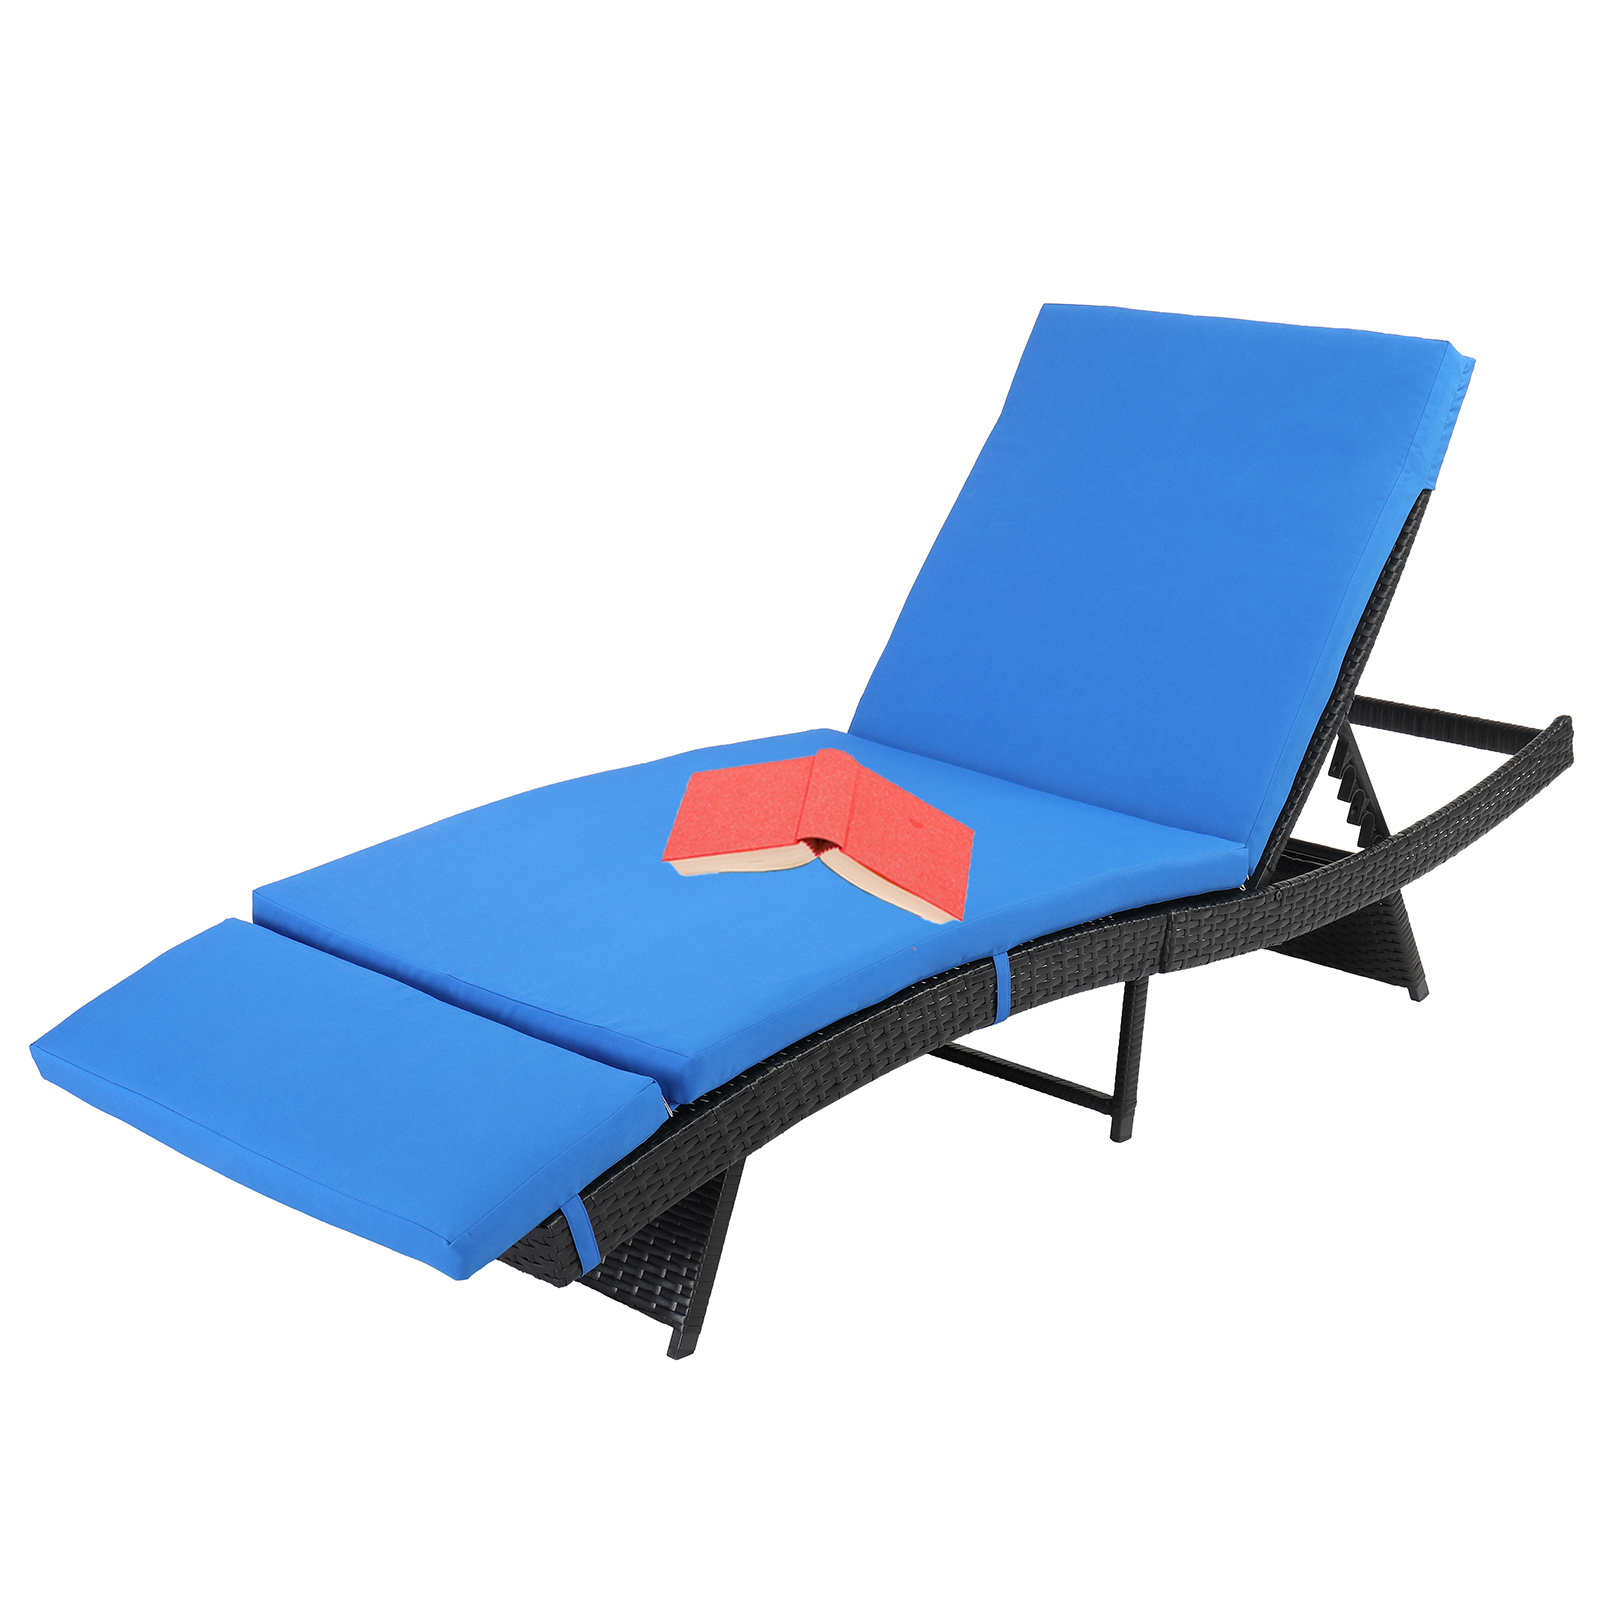 Seizeen Chaise Lounge Outdoor, Patio Rattan Lounge Chair 6-Position Adjustable, Poolside Sun Recliner Cushioned, Blue Cushions - image 1 of 11